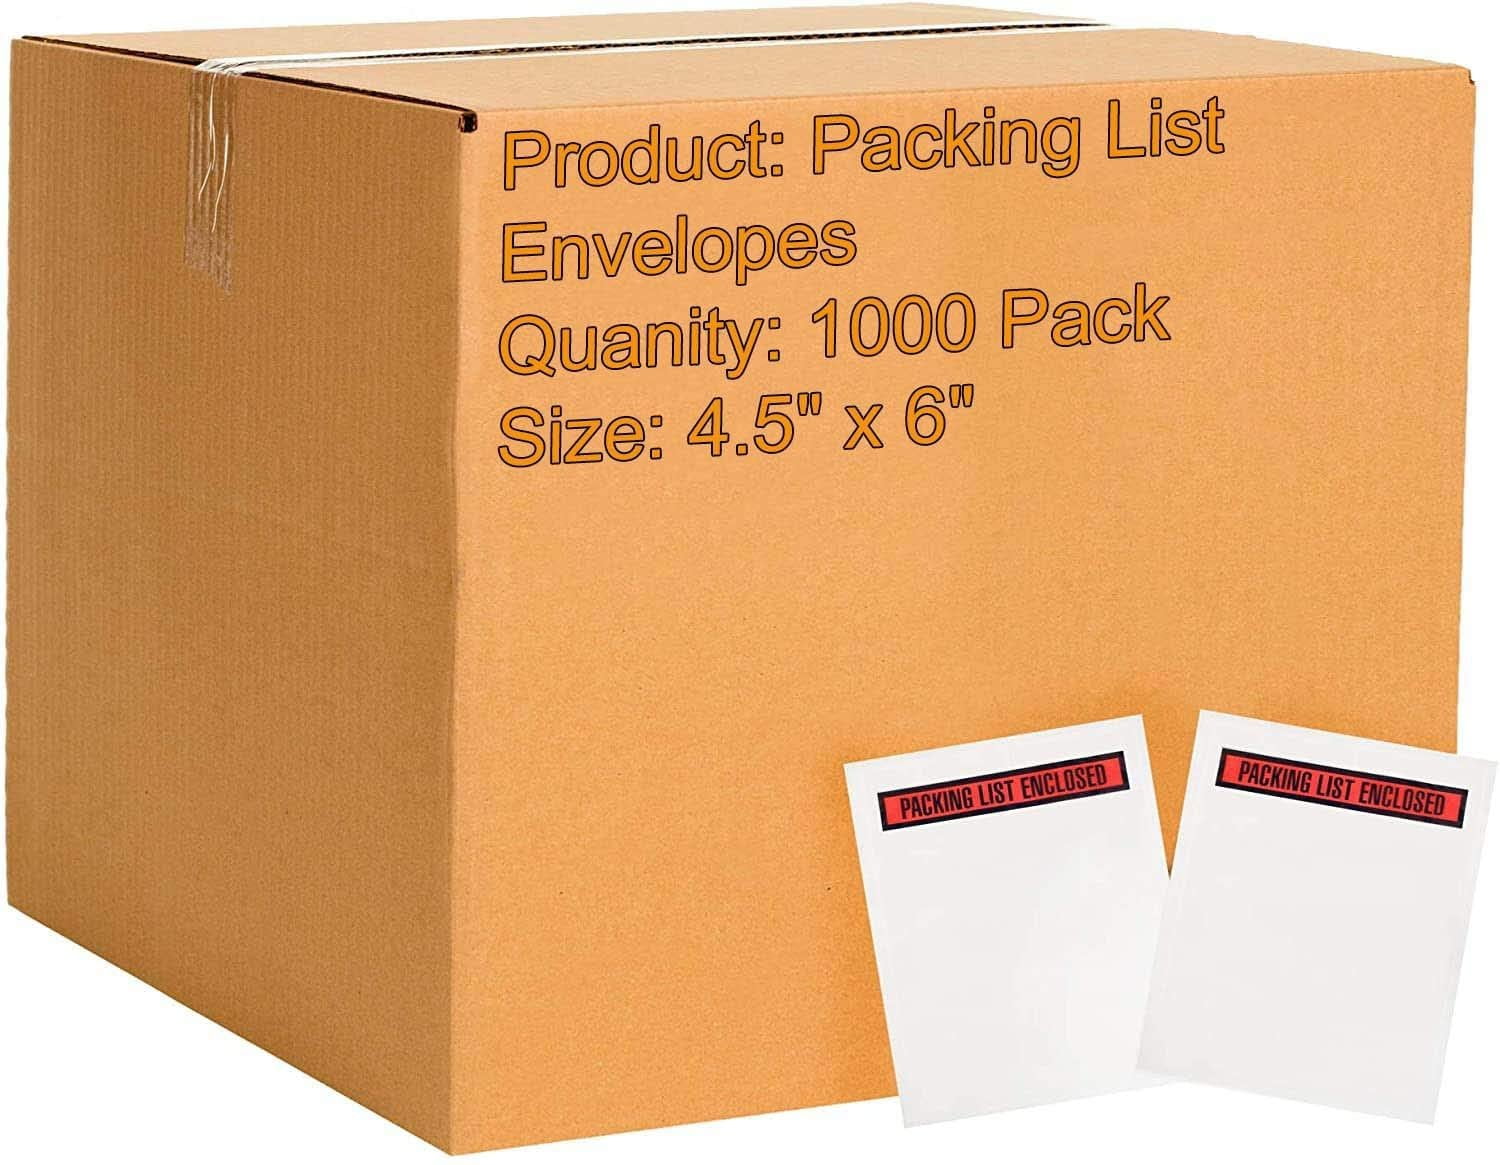 2 Mil Poly Box Packaging Packing List Enclosed Envelope 4.5 x 5.5 Case of 1,000 Blue 